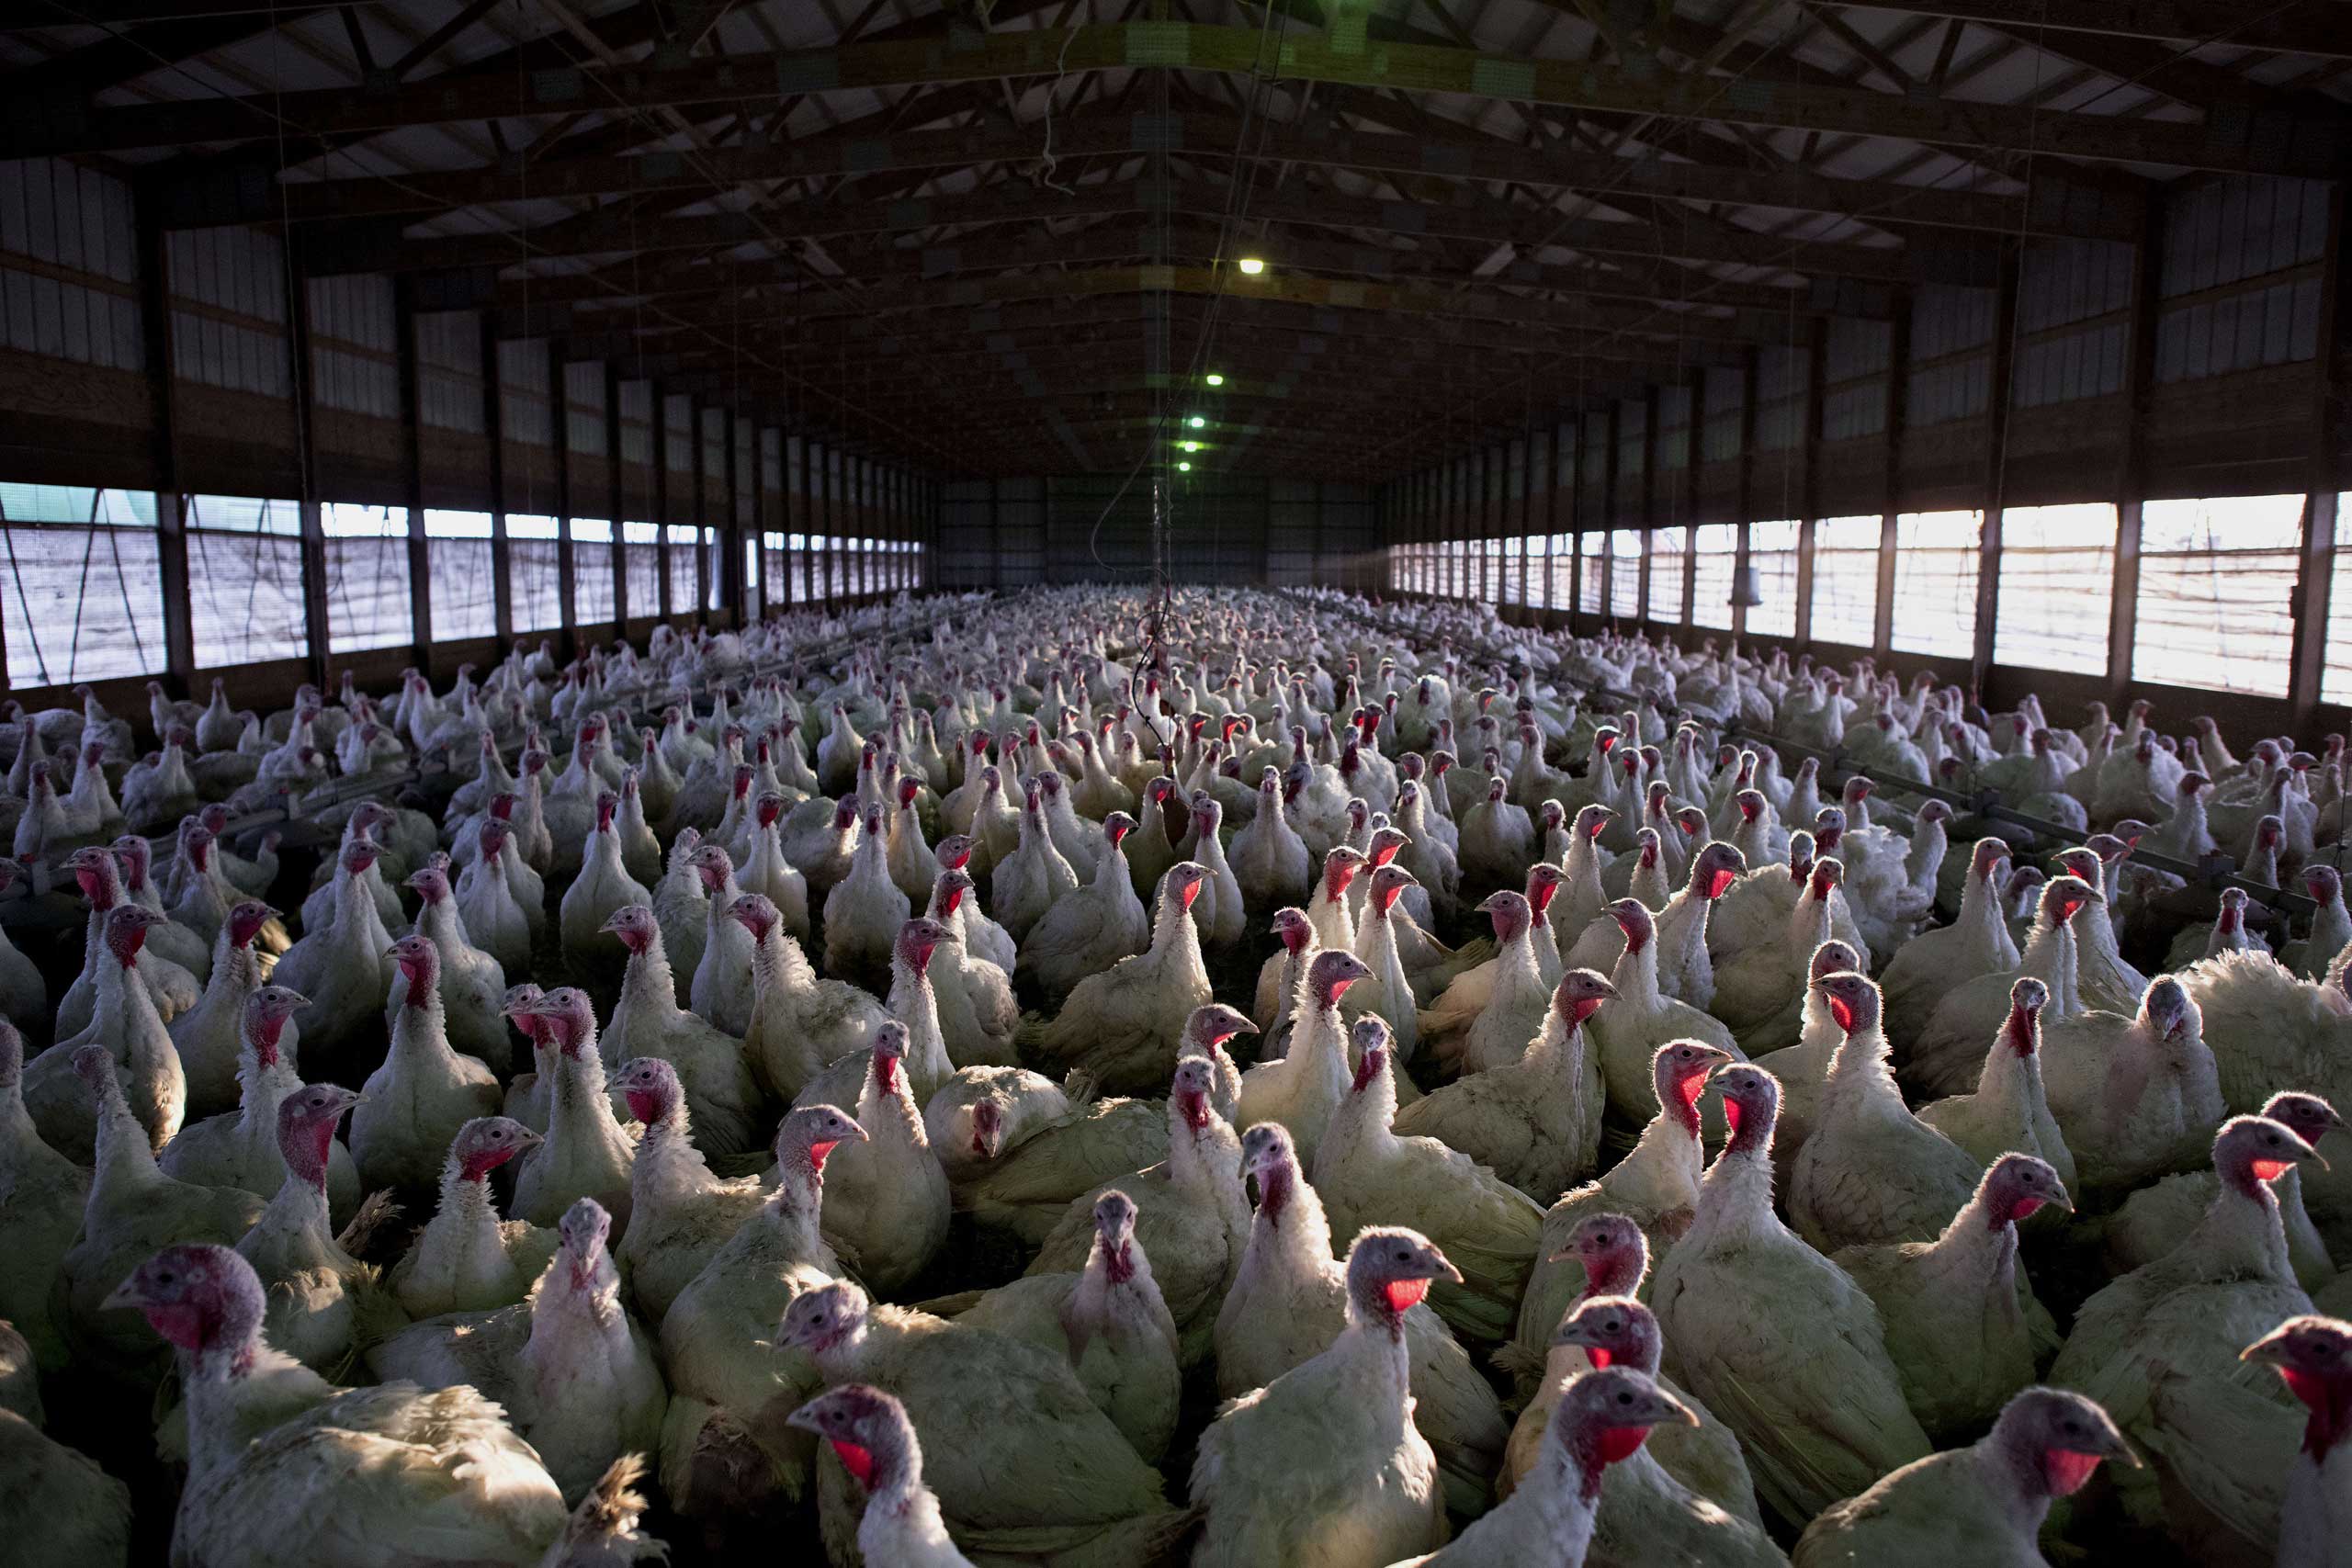 Nov. 10, 2014. Turkeys stand in a barn at Yordy Turkey Farm in Morton, Ill. Founded in the 1930s, Yordy Turkey Farm produces approximately 10,000 turkeys annually, growing their own non-GMO feed and processing the birds in-house.